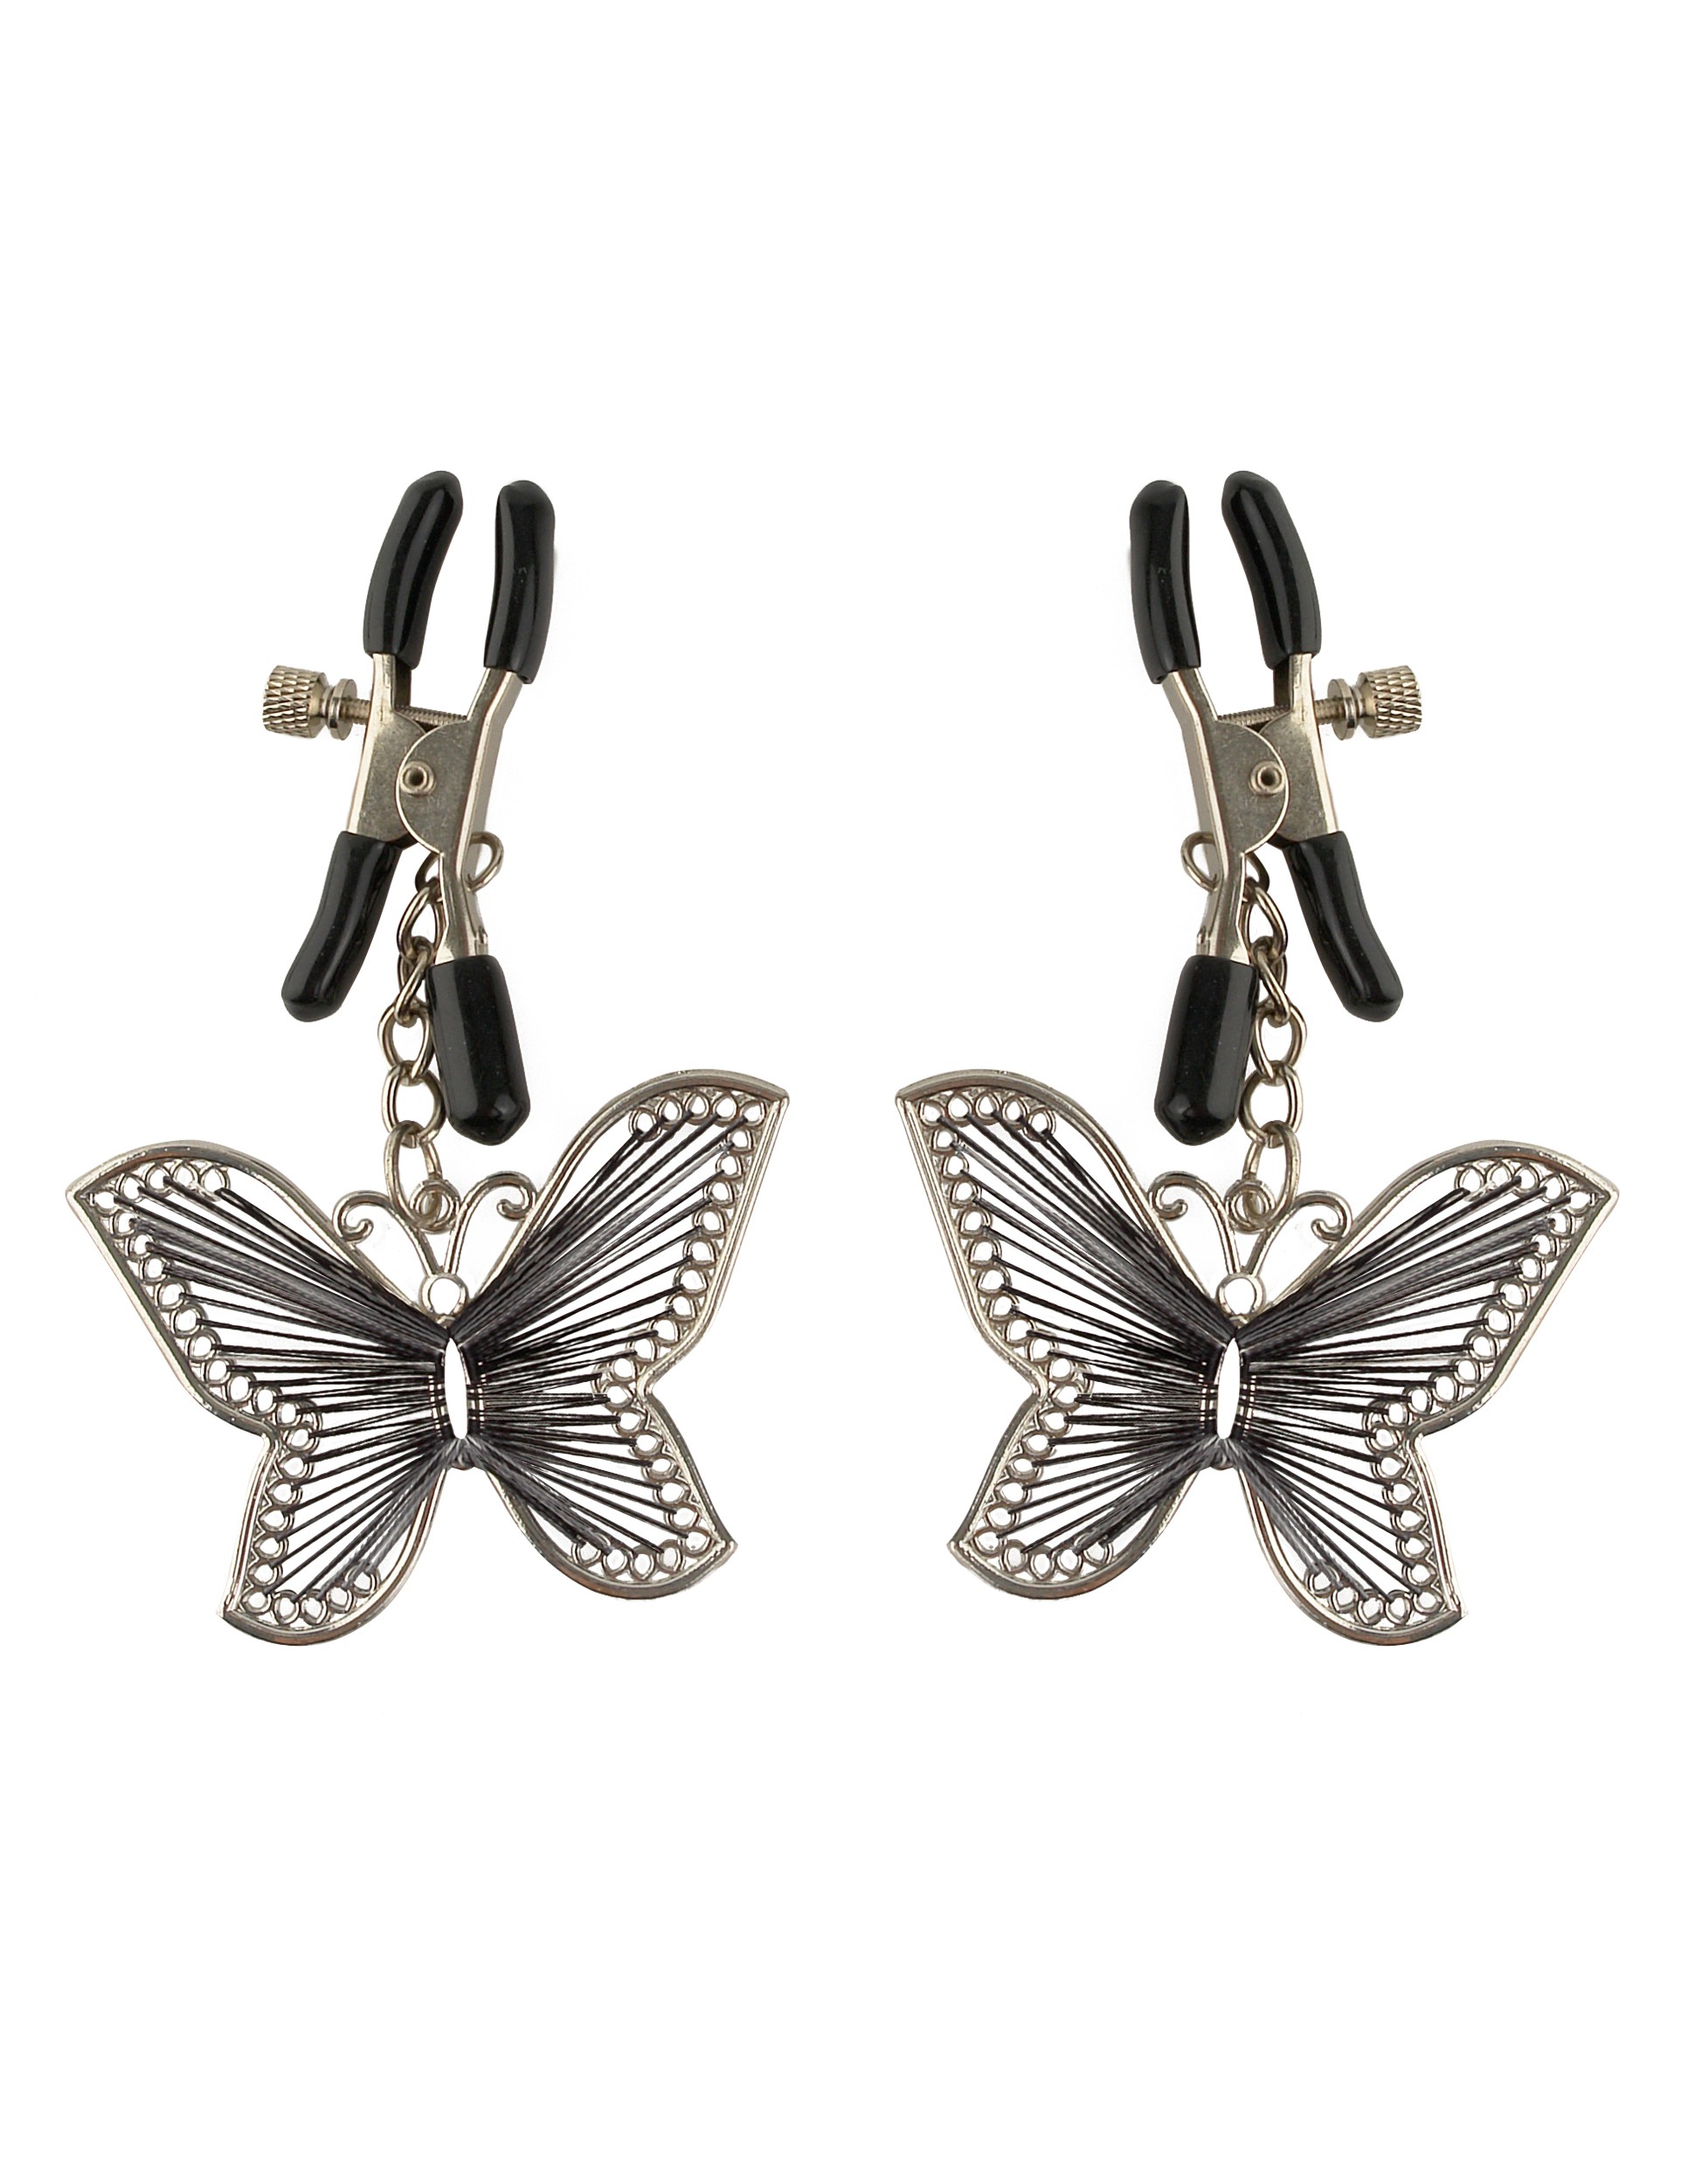 Pipedream Fetish Fantasy Series Butterfly Nipple Clamps